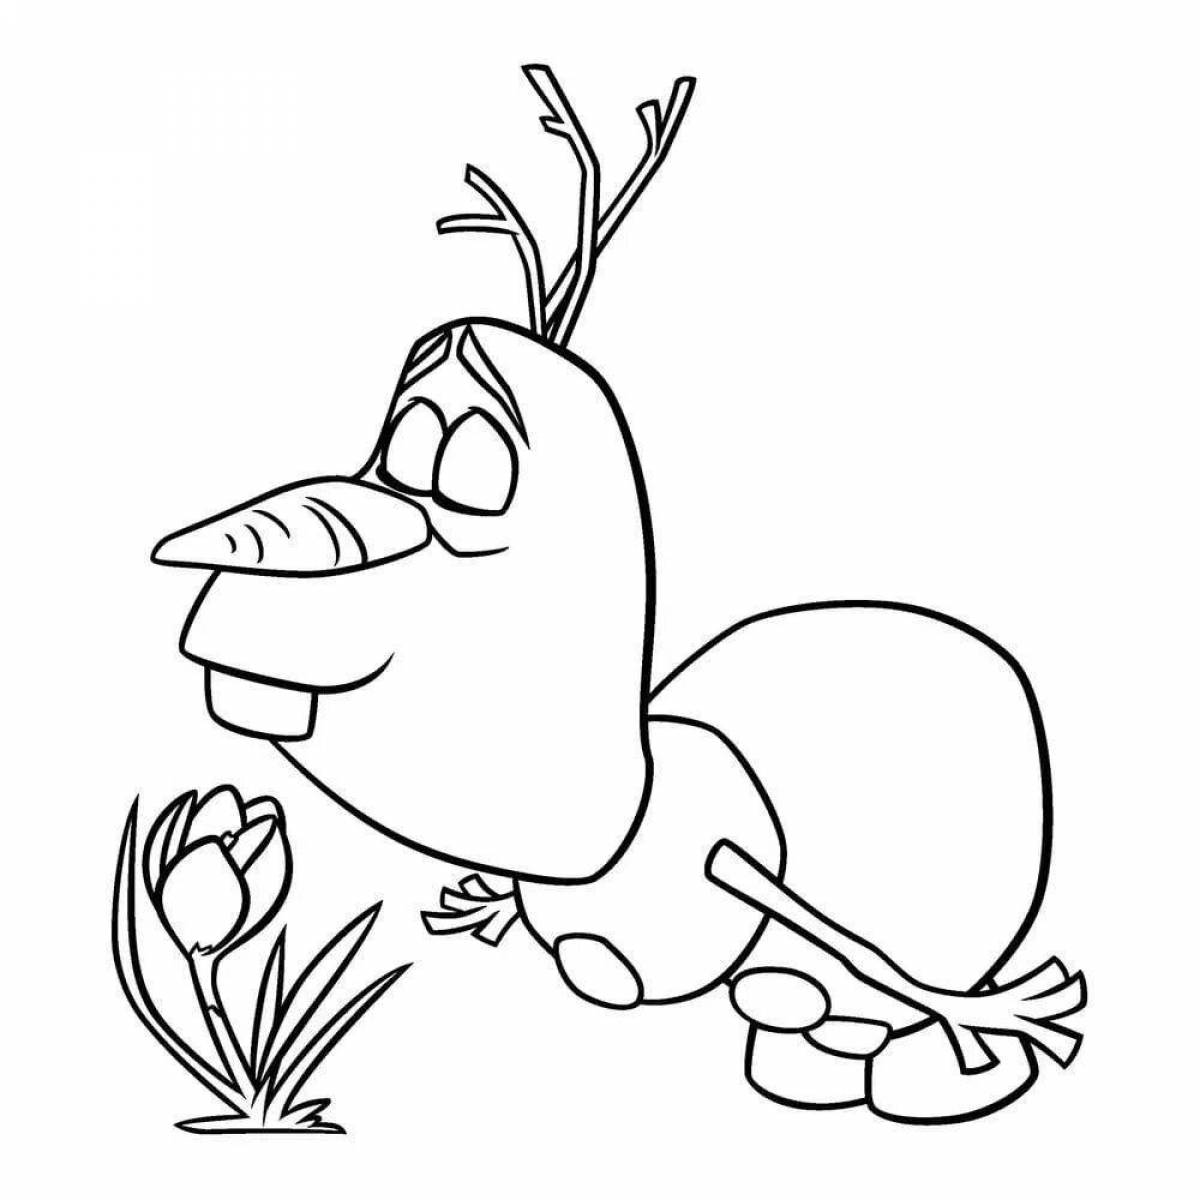 Olaf live coloring for kids